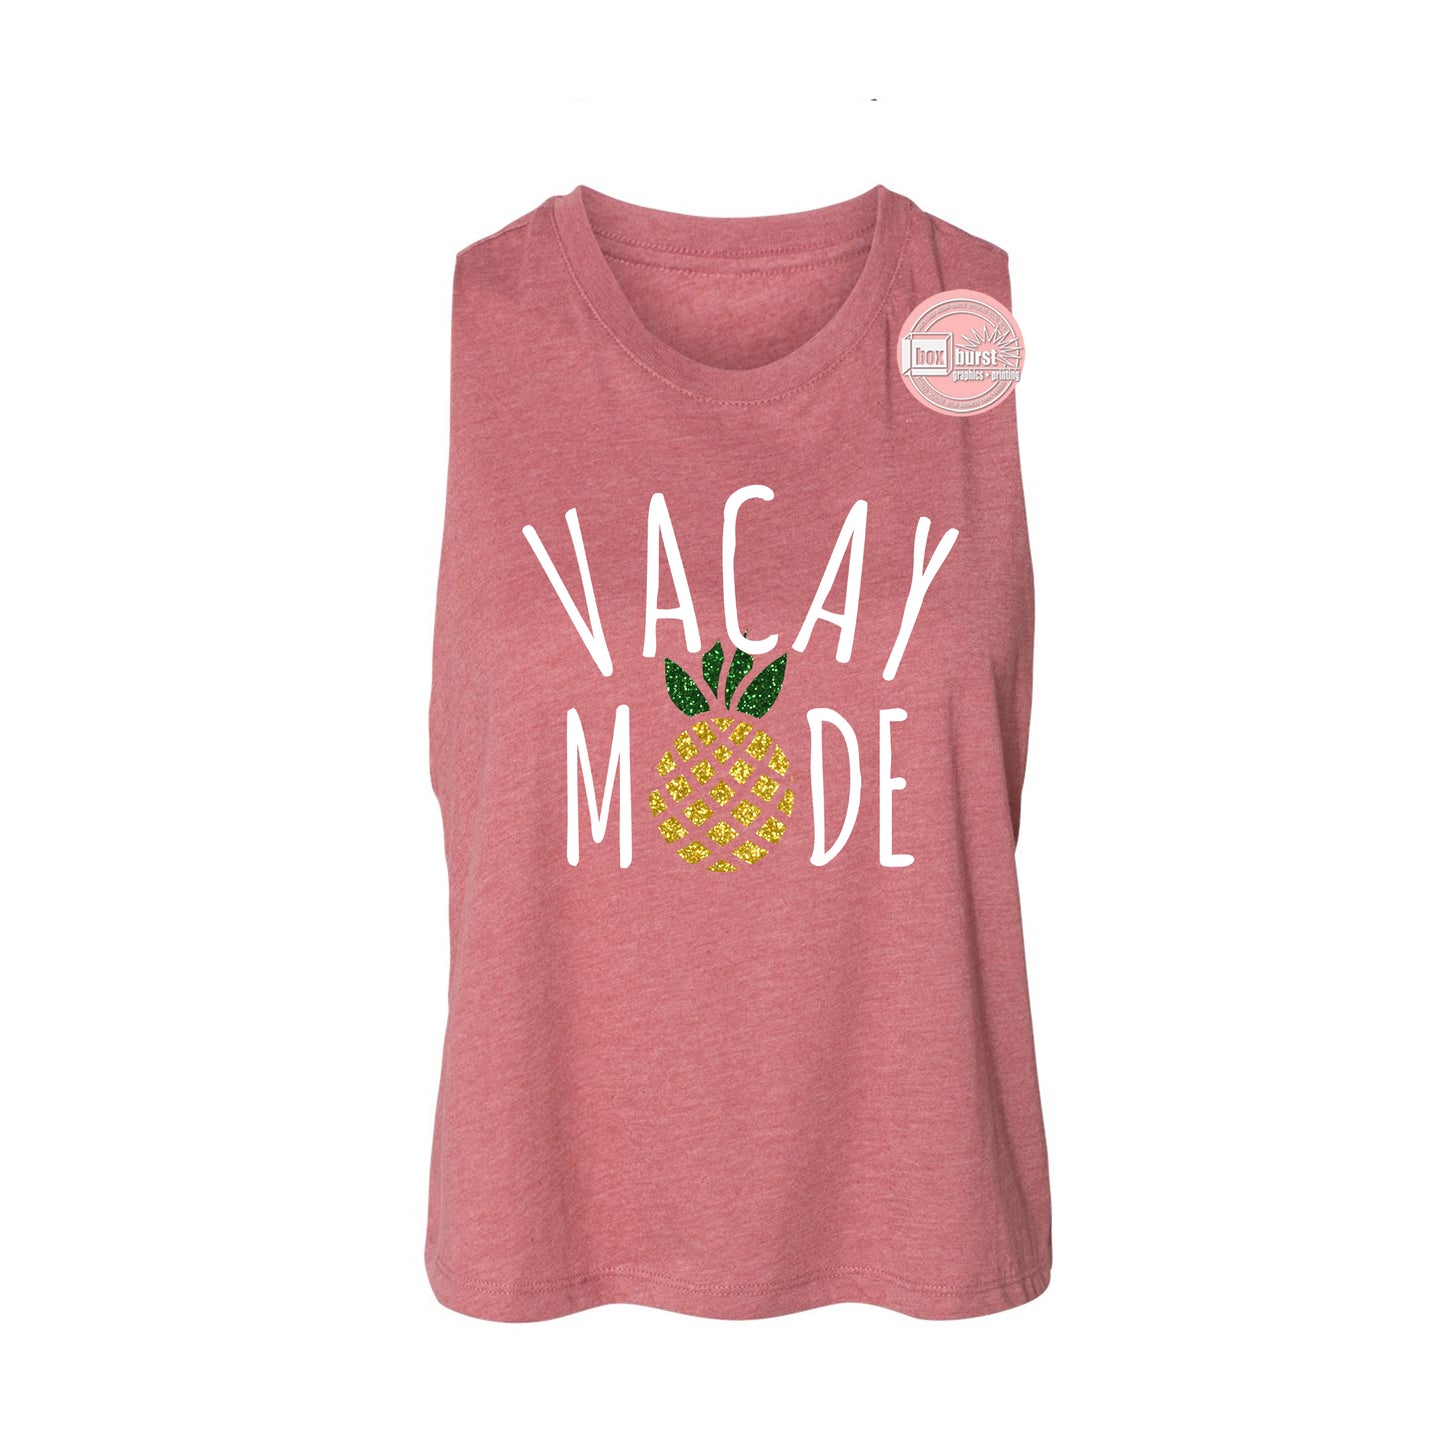 Vacay mode sparkly pineapple crop muscle tank